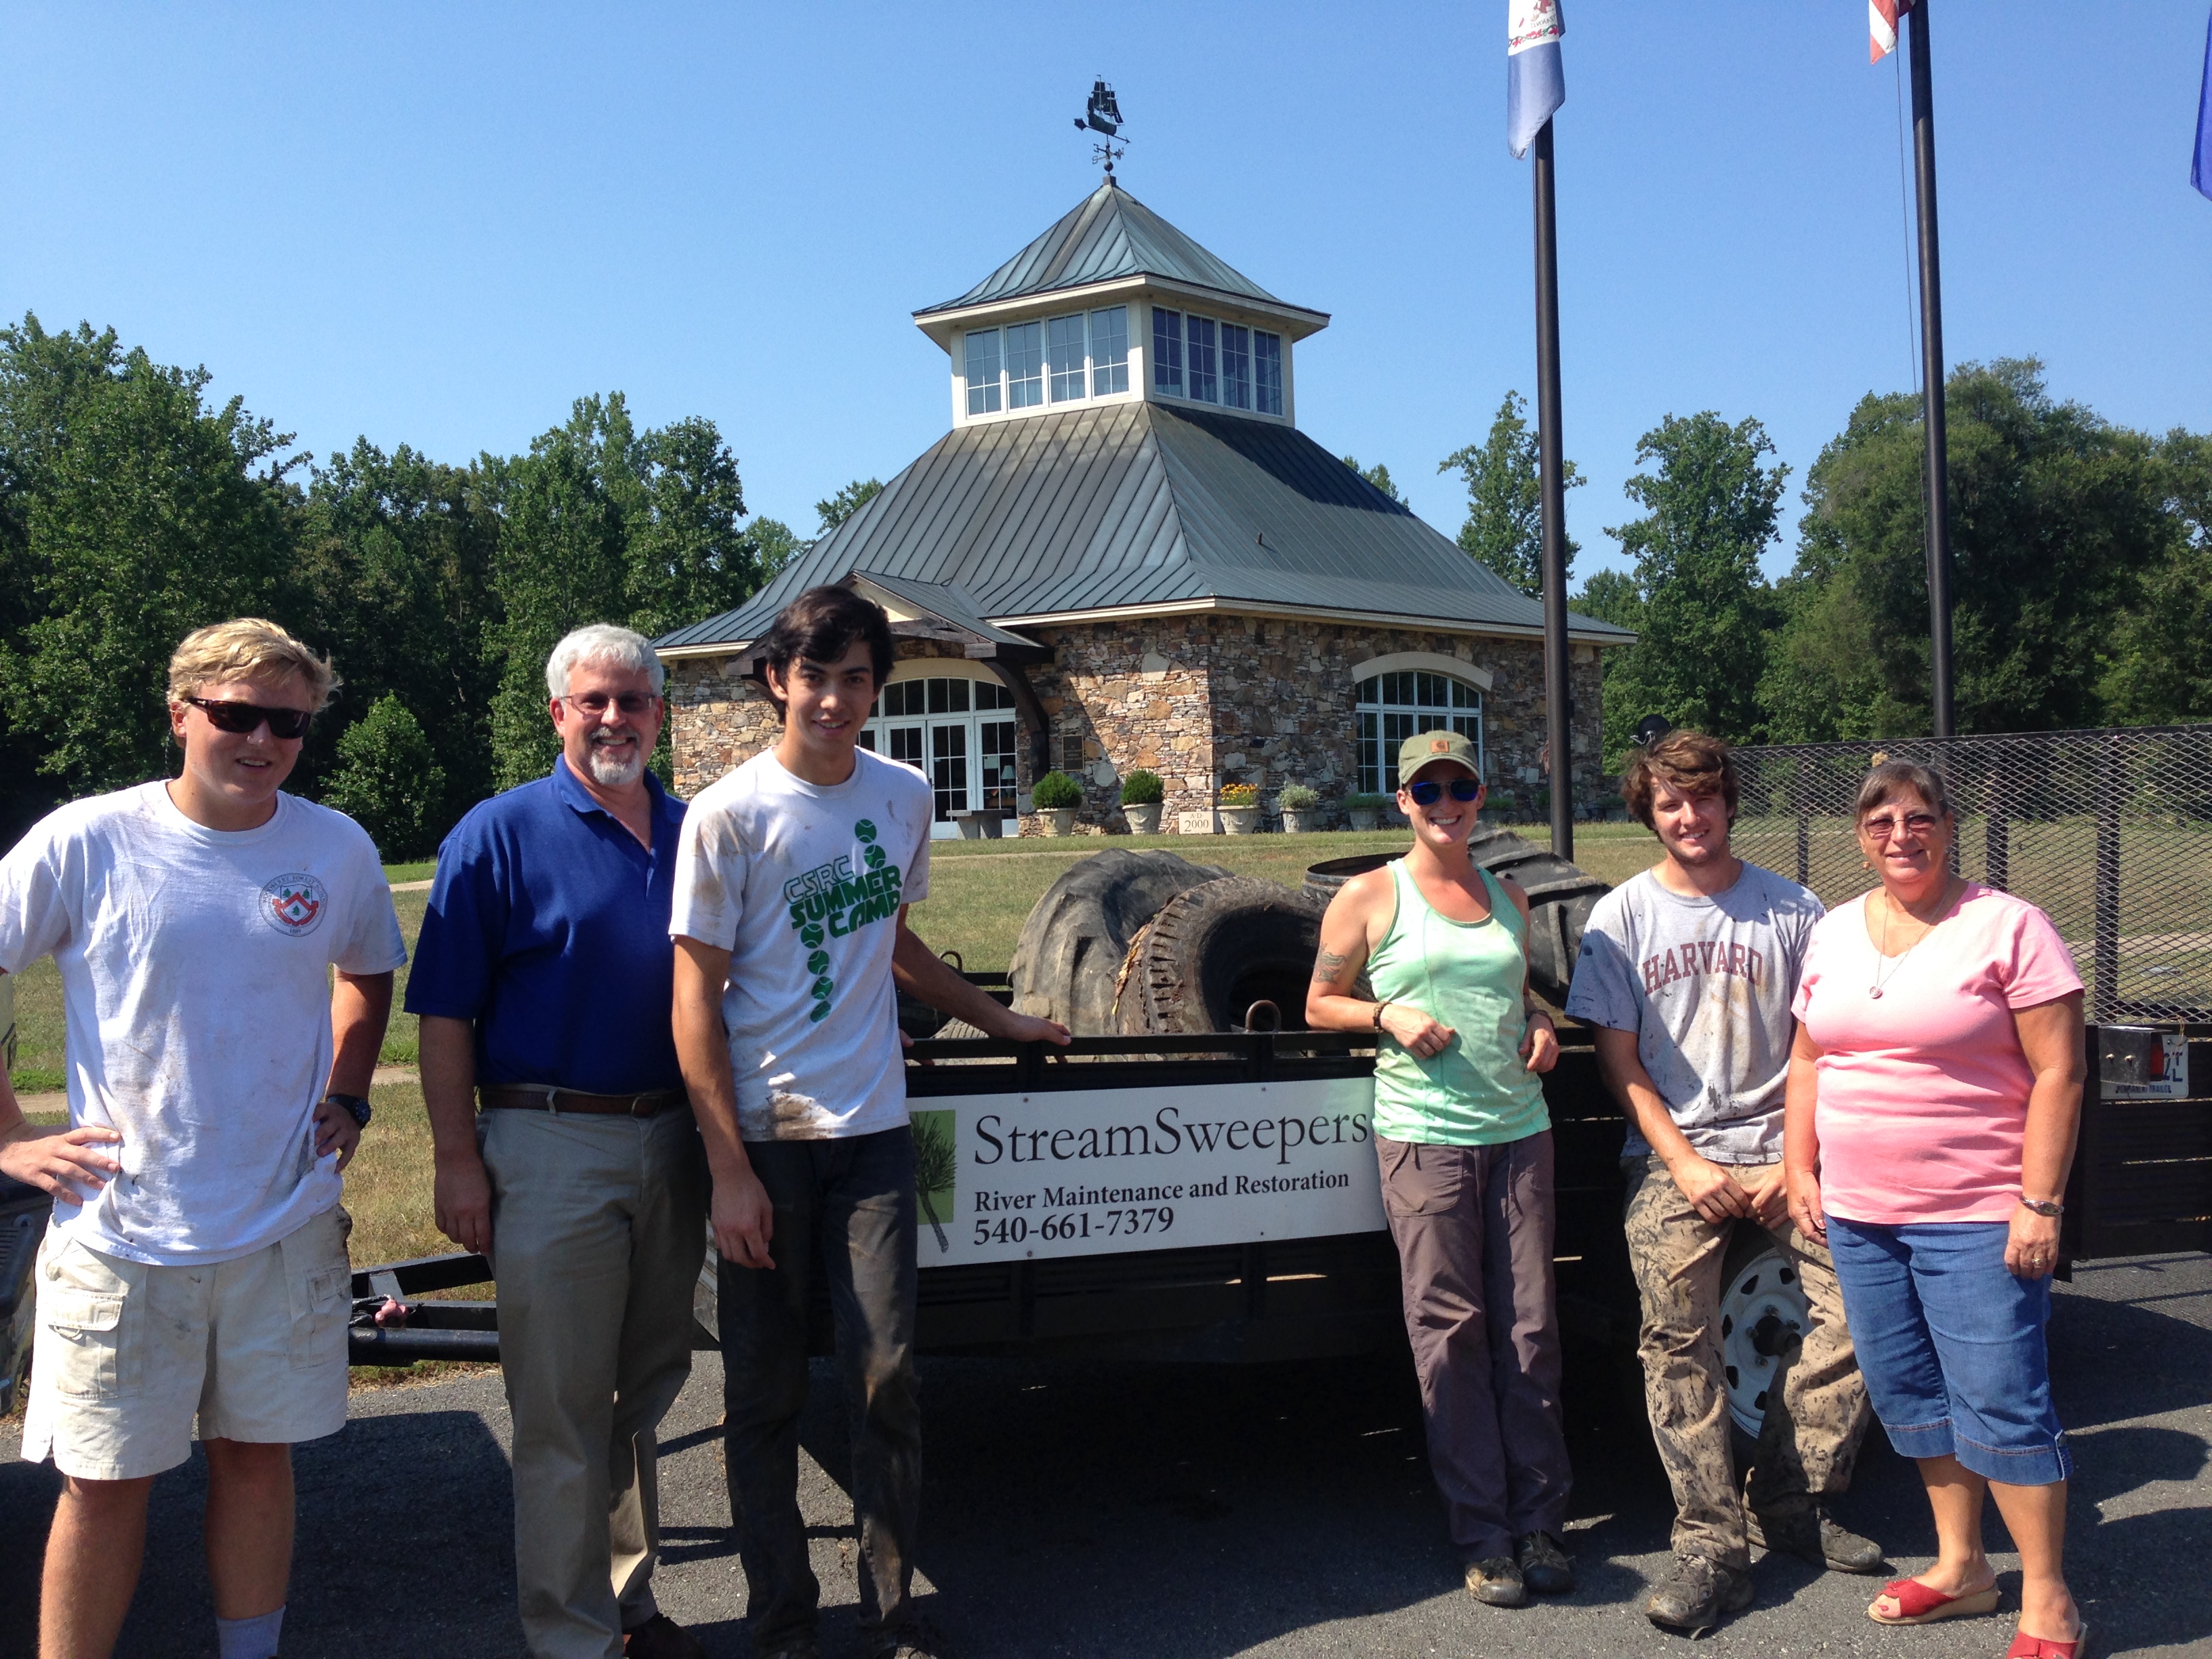 Staff of Germanna Foundation and StreamSweepers 2015 Crew, Locust Grove, VA